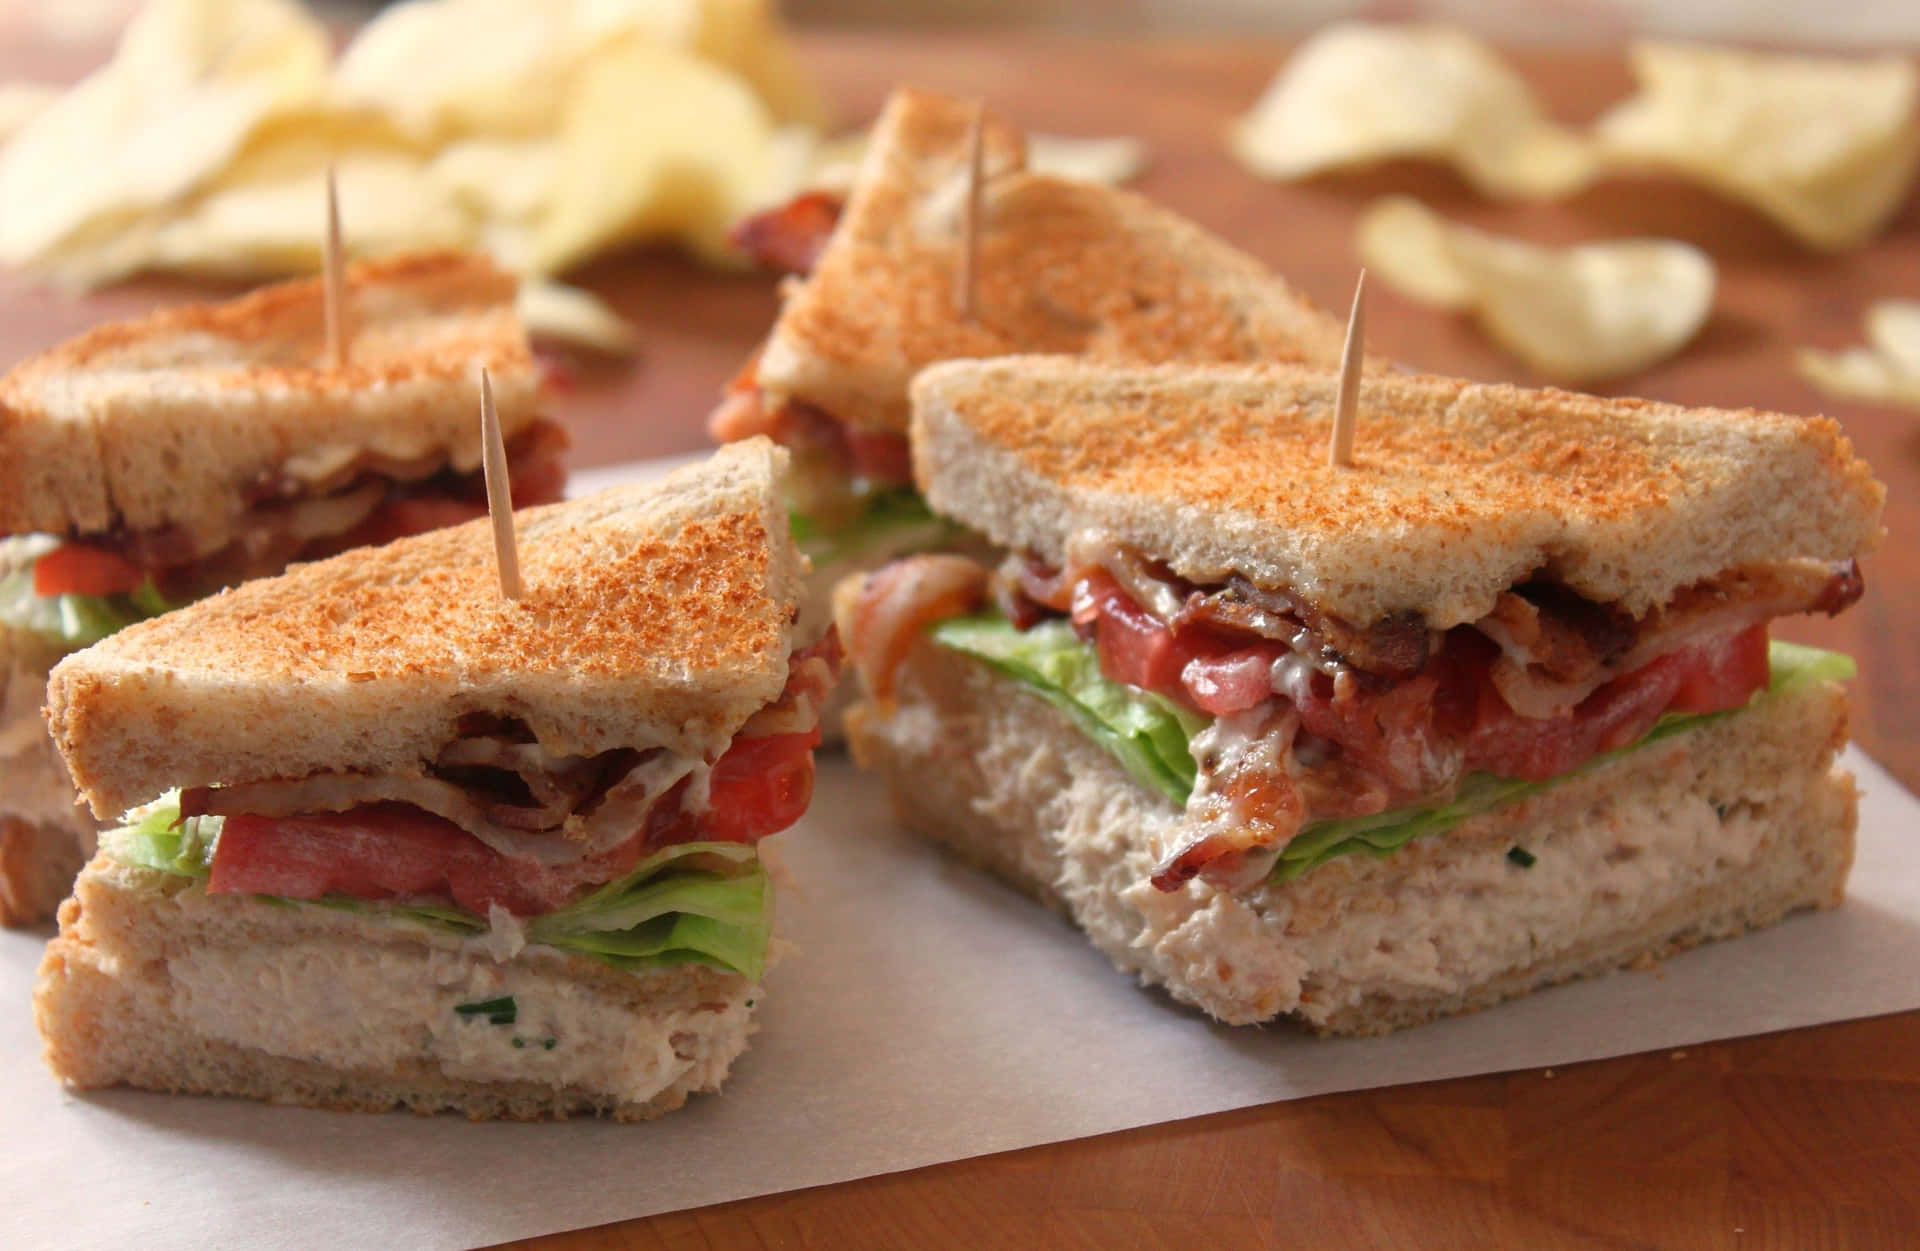 Delicious and Appetizing Club Sandwich